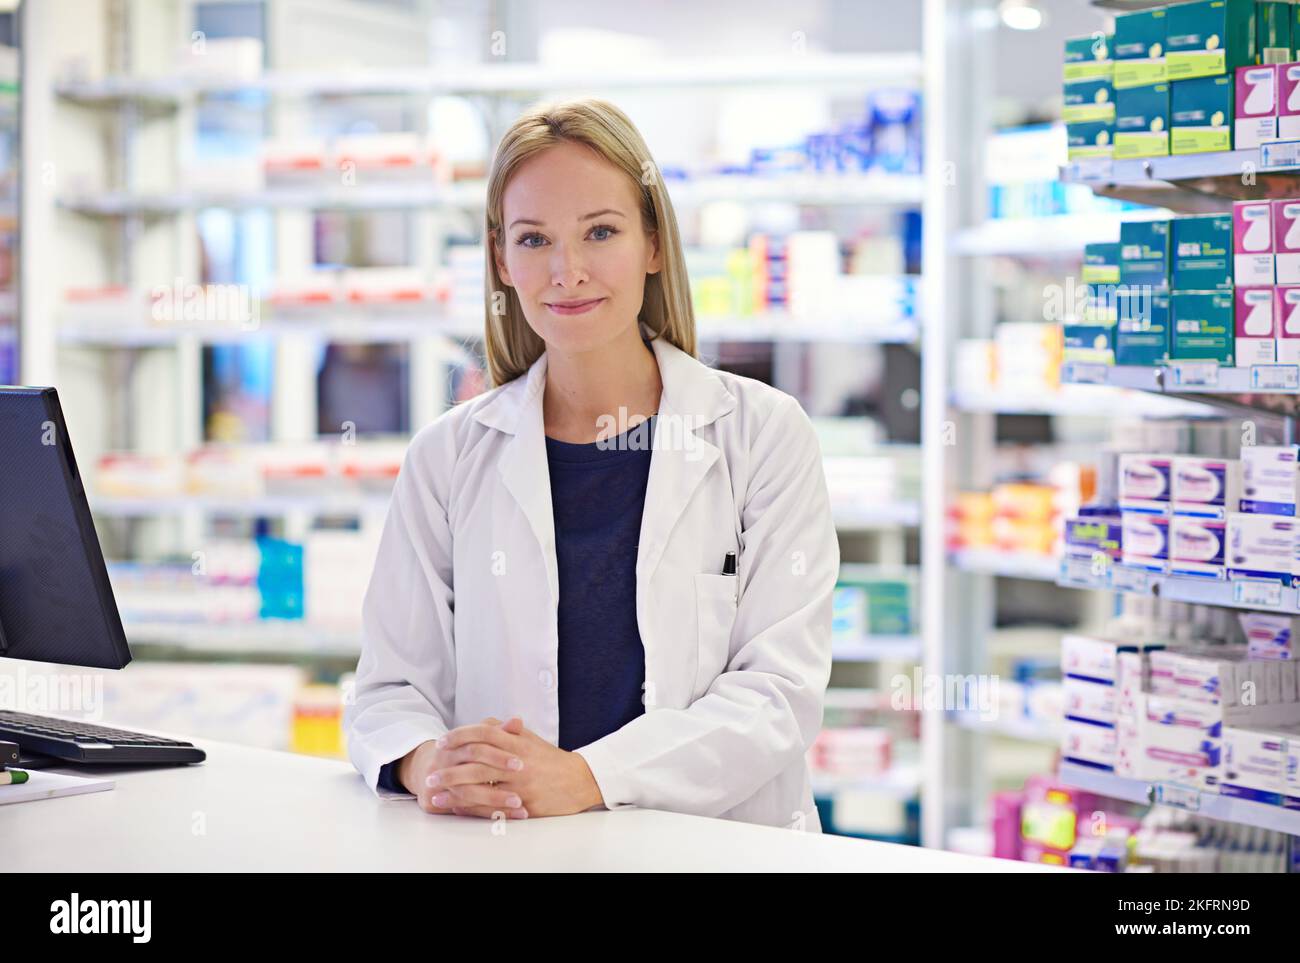 What seems to be the trouble. Portrait of an attractive pharmacist standing at the prescription counter. Stock Photo